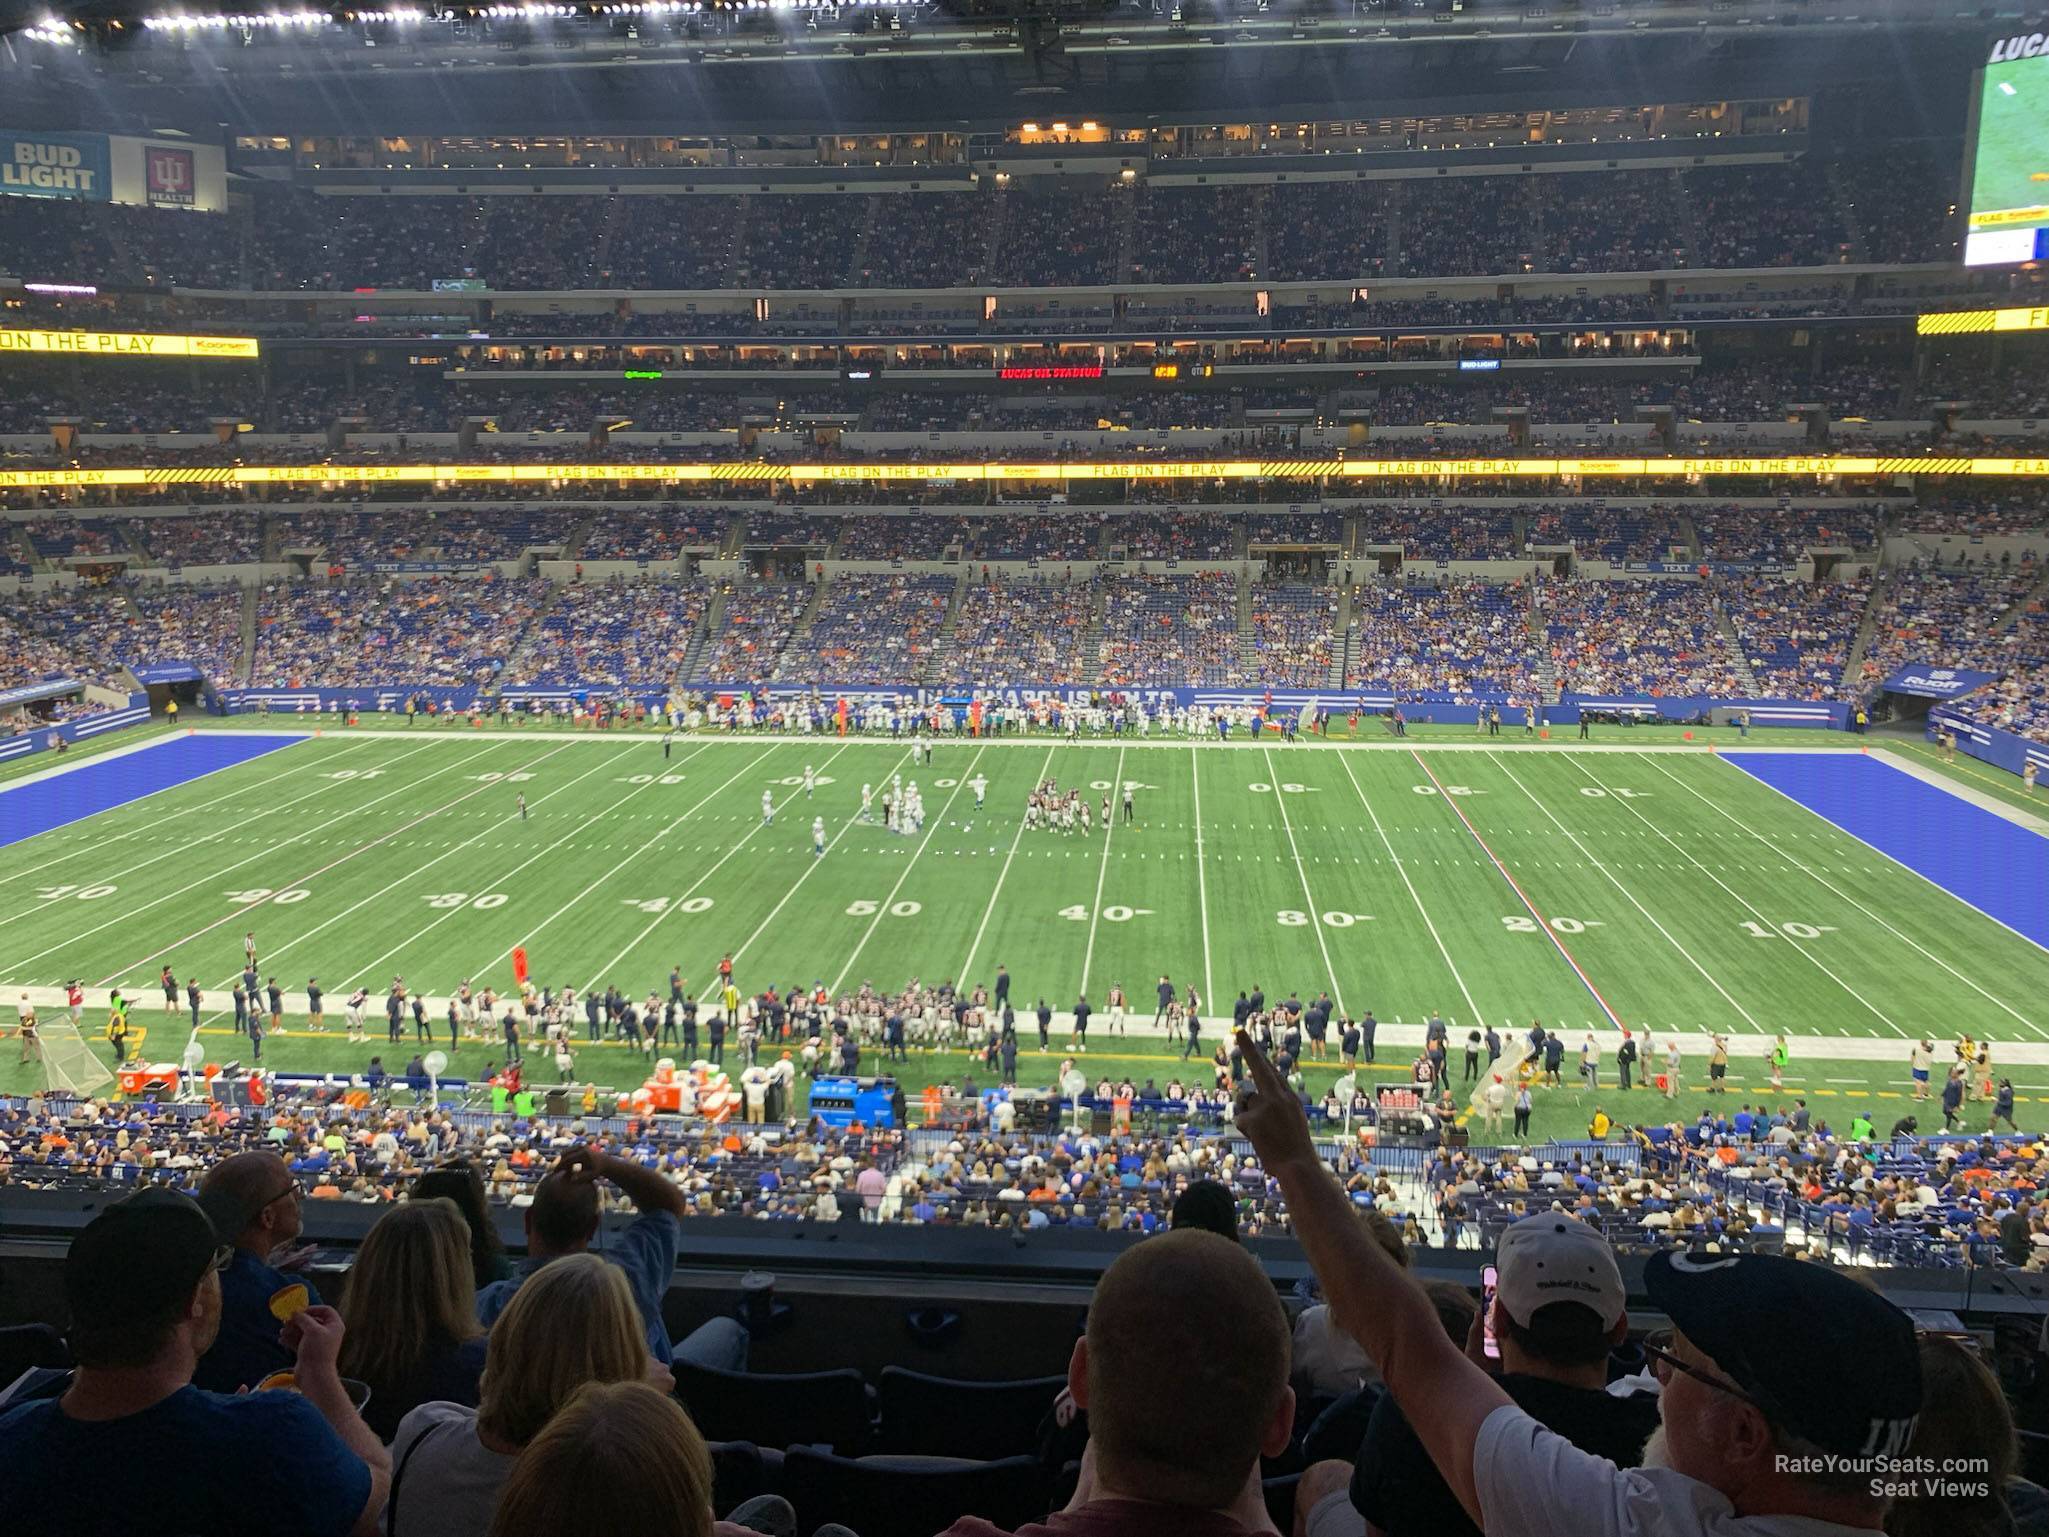 section 312, row 4n seat view  for football - lucas oil stadium